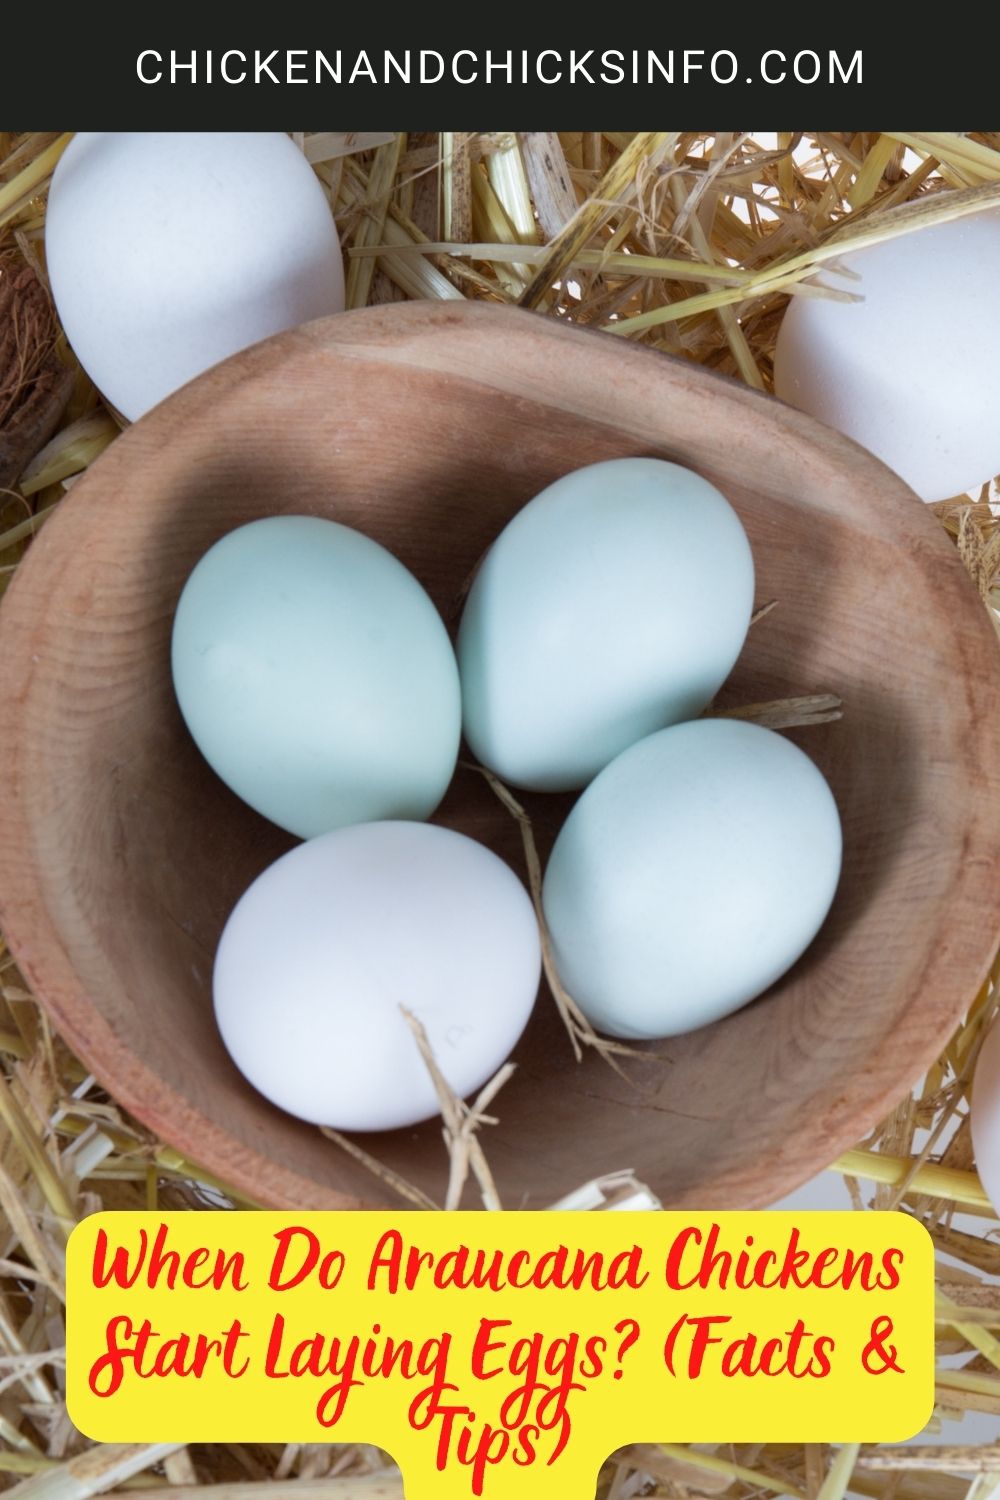 When Do Araucana Chickens Start Laying Eggs? (Facts & Tips) poster.
